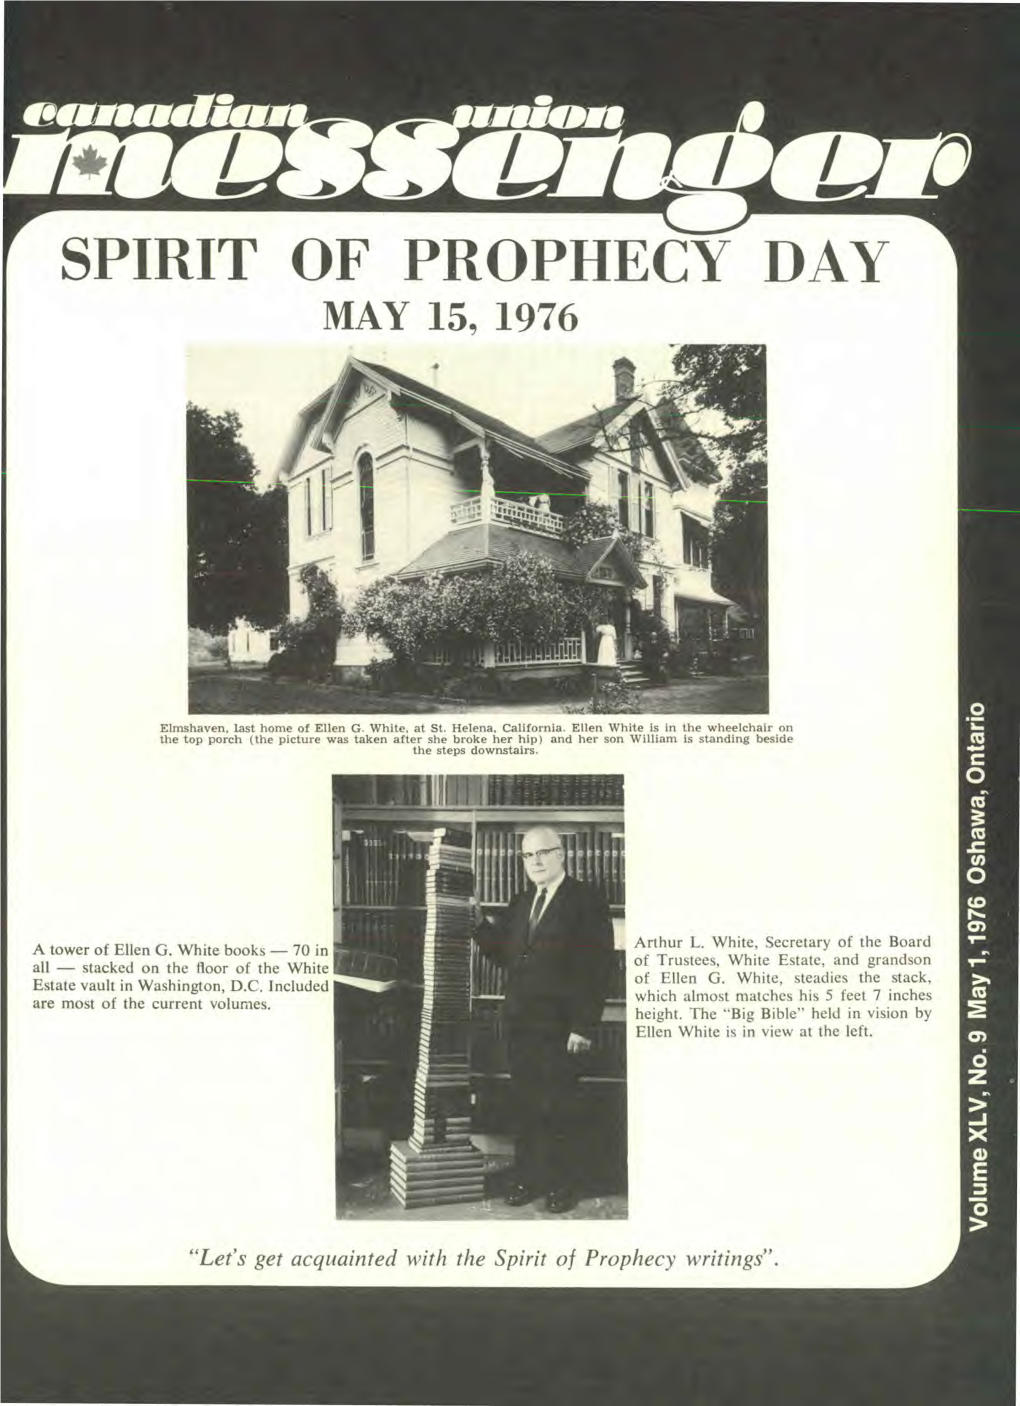 R SPIRIT of PROPHECY DAY I MAY 15, 1976